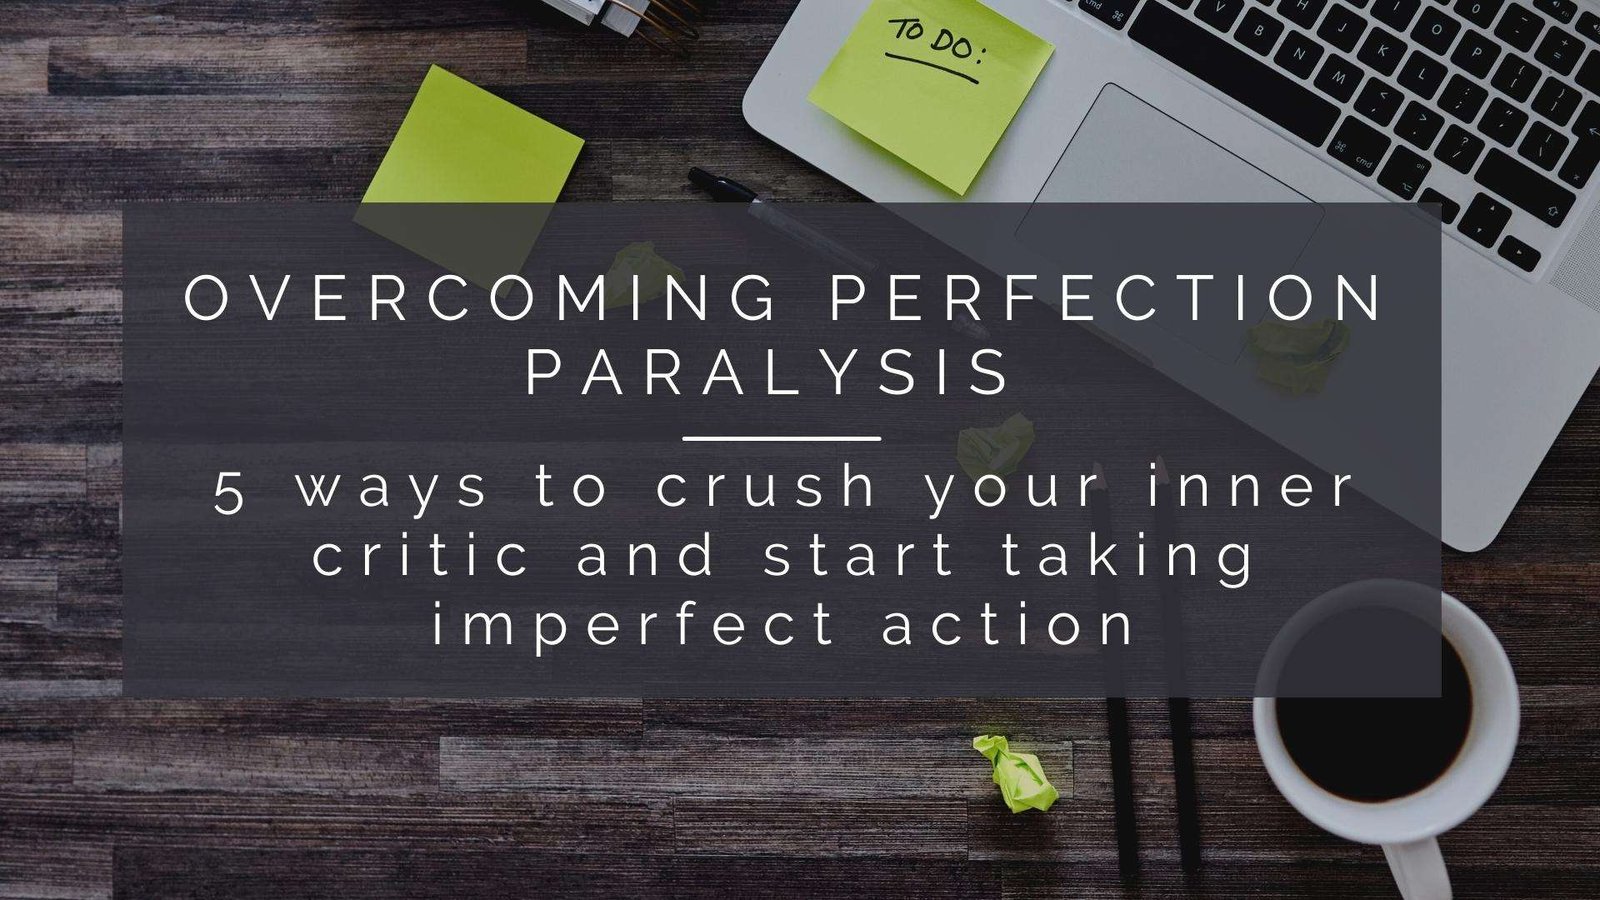 Overcoming Perfection paralysis - 5 ways to crush your inner critic